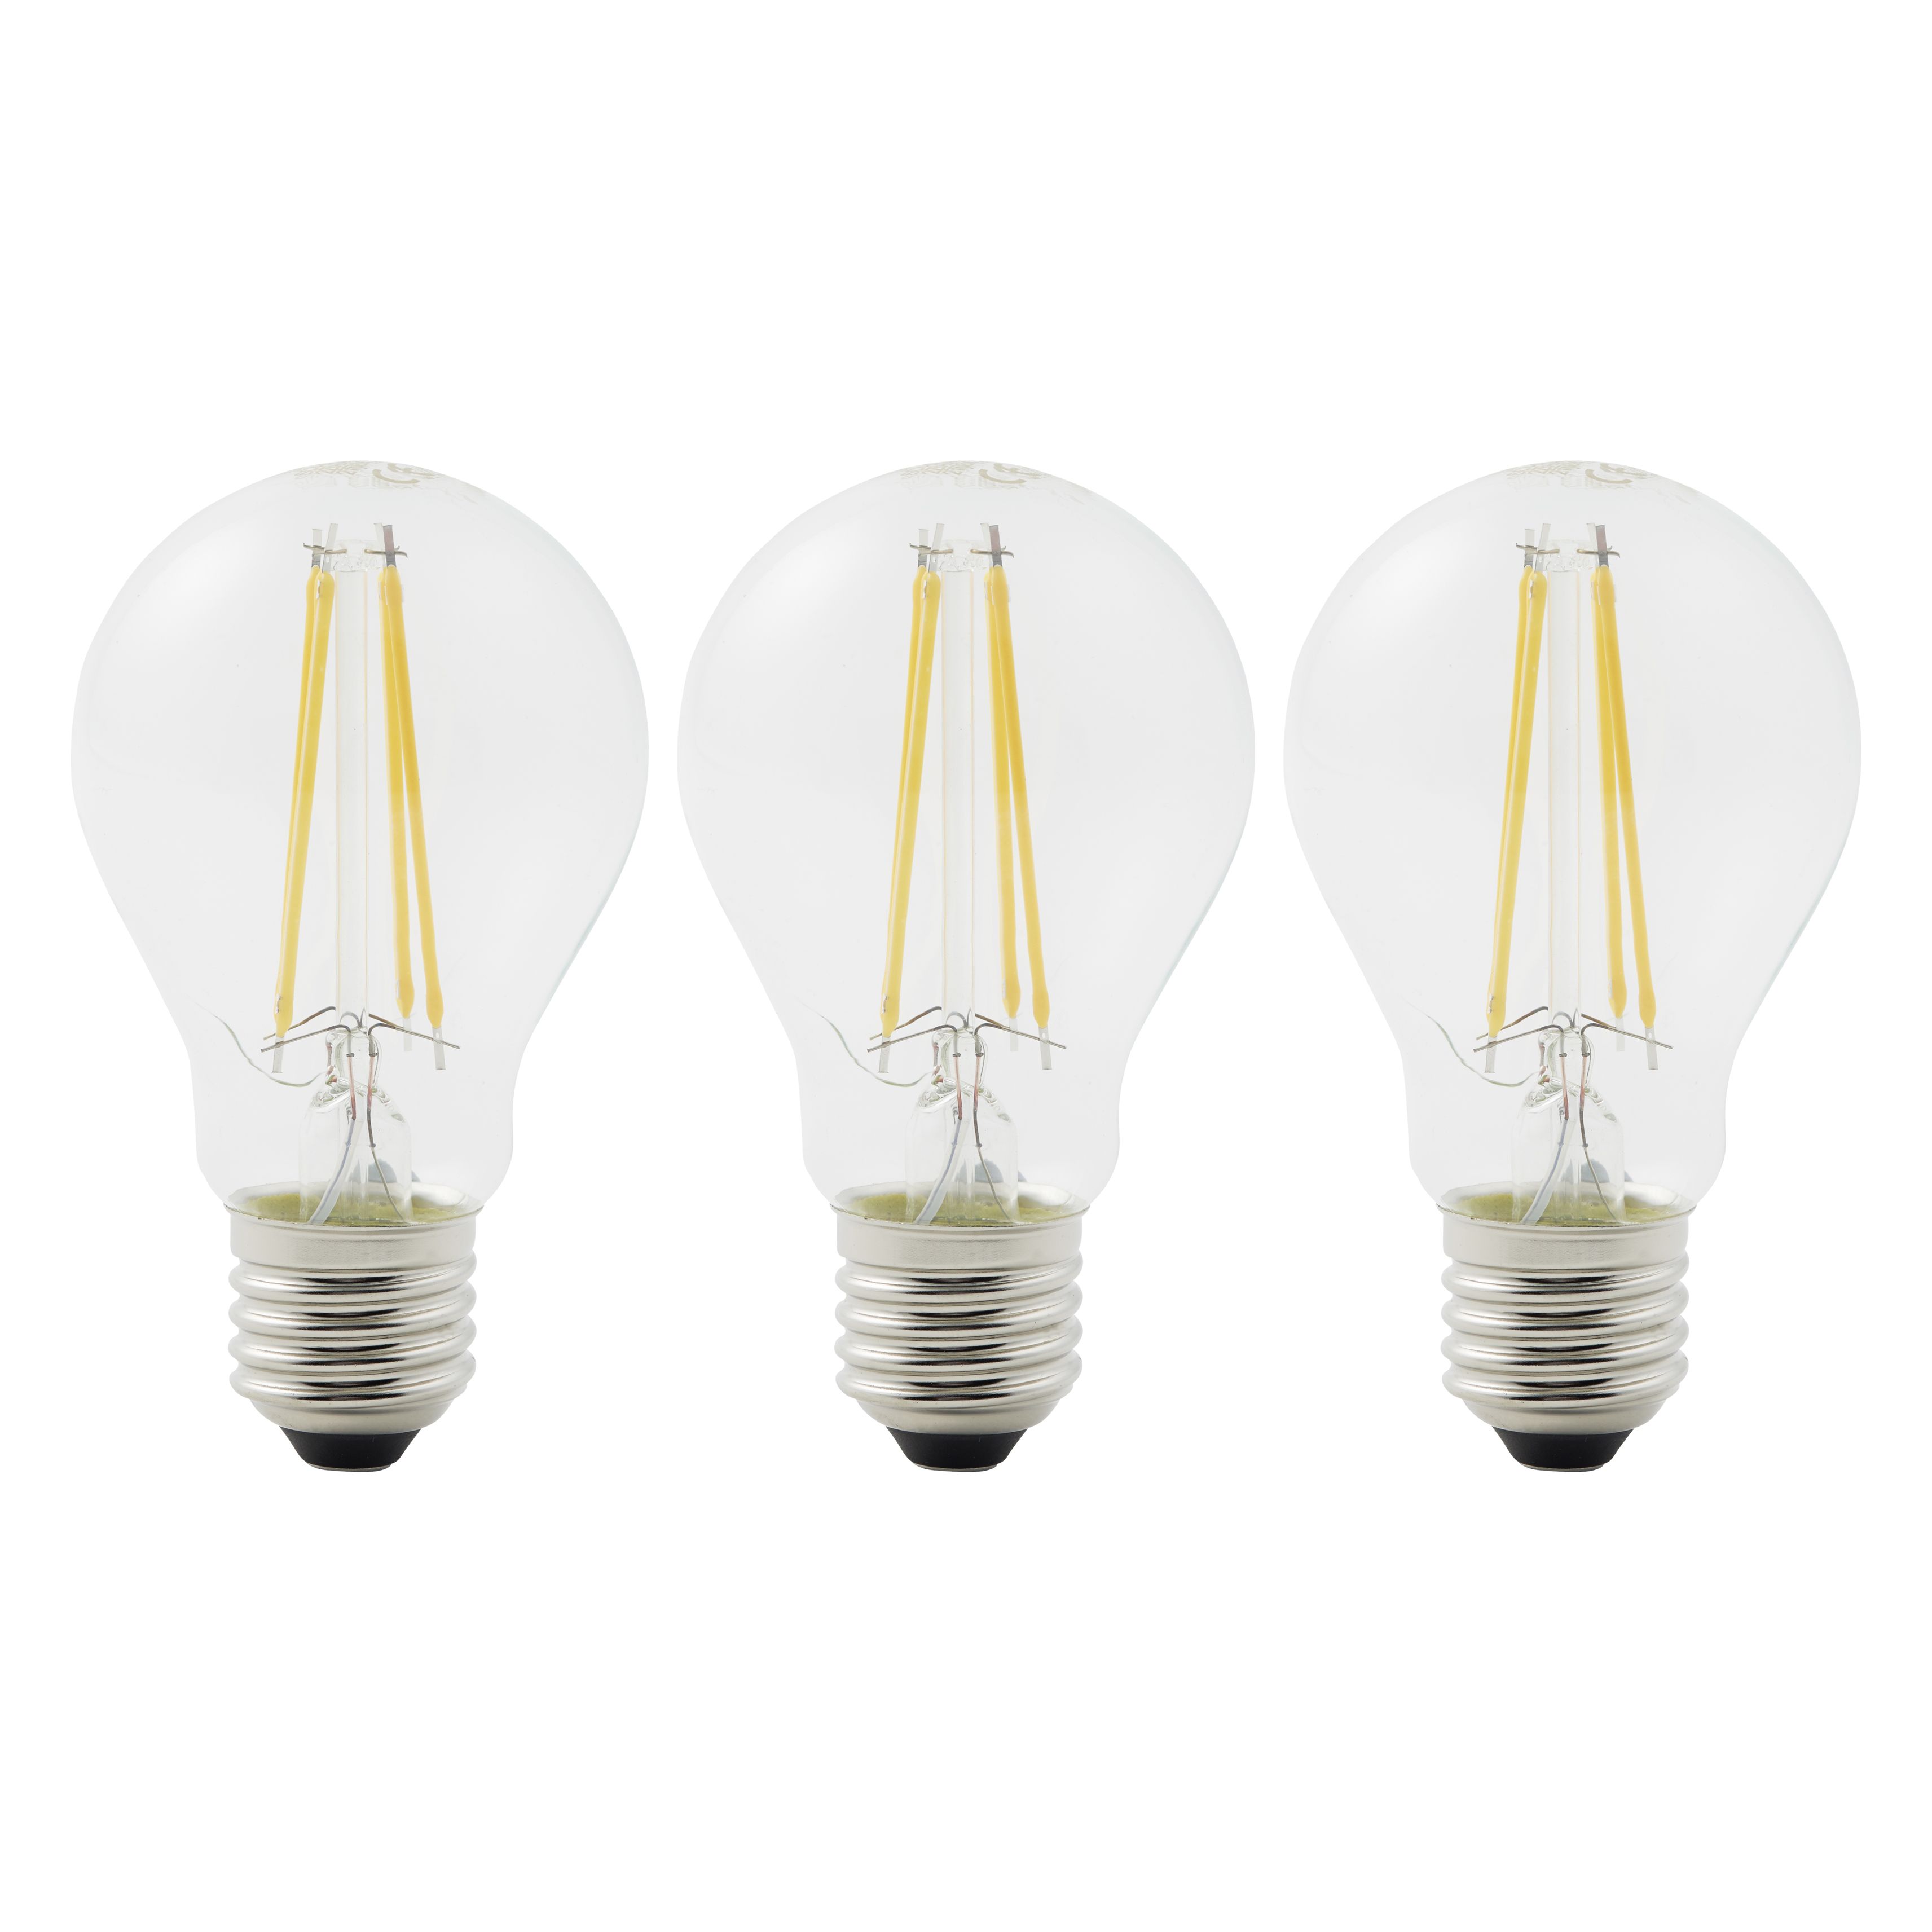 Diall E27 5.9W 806lm Clear GLS Warm white LED filament Dimmable Filament Light bulb, Pack of 3